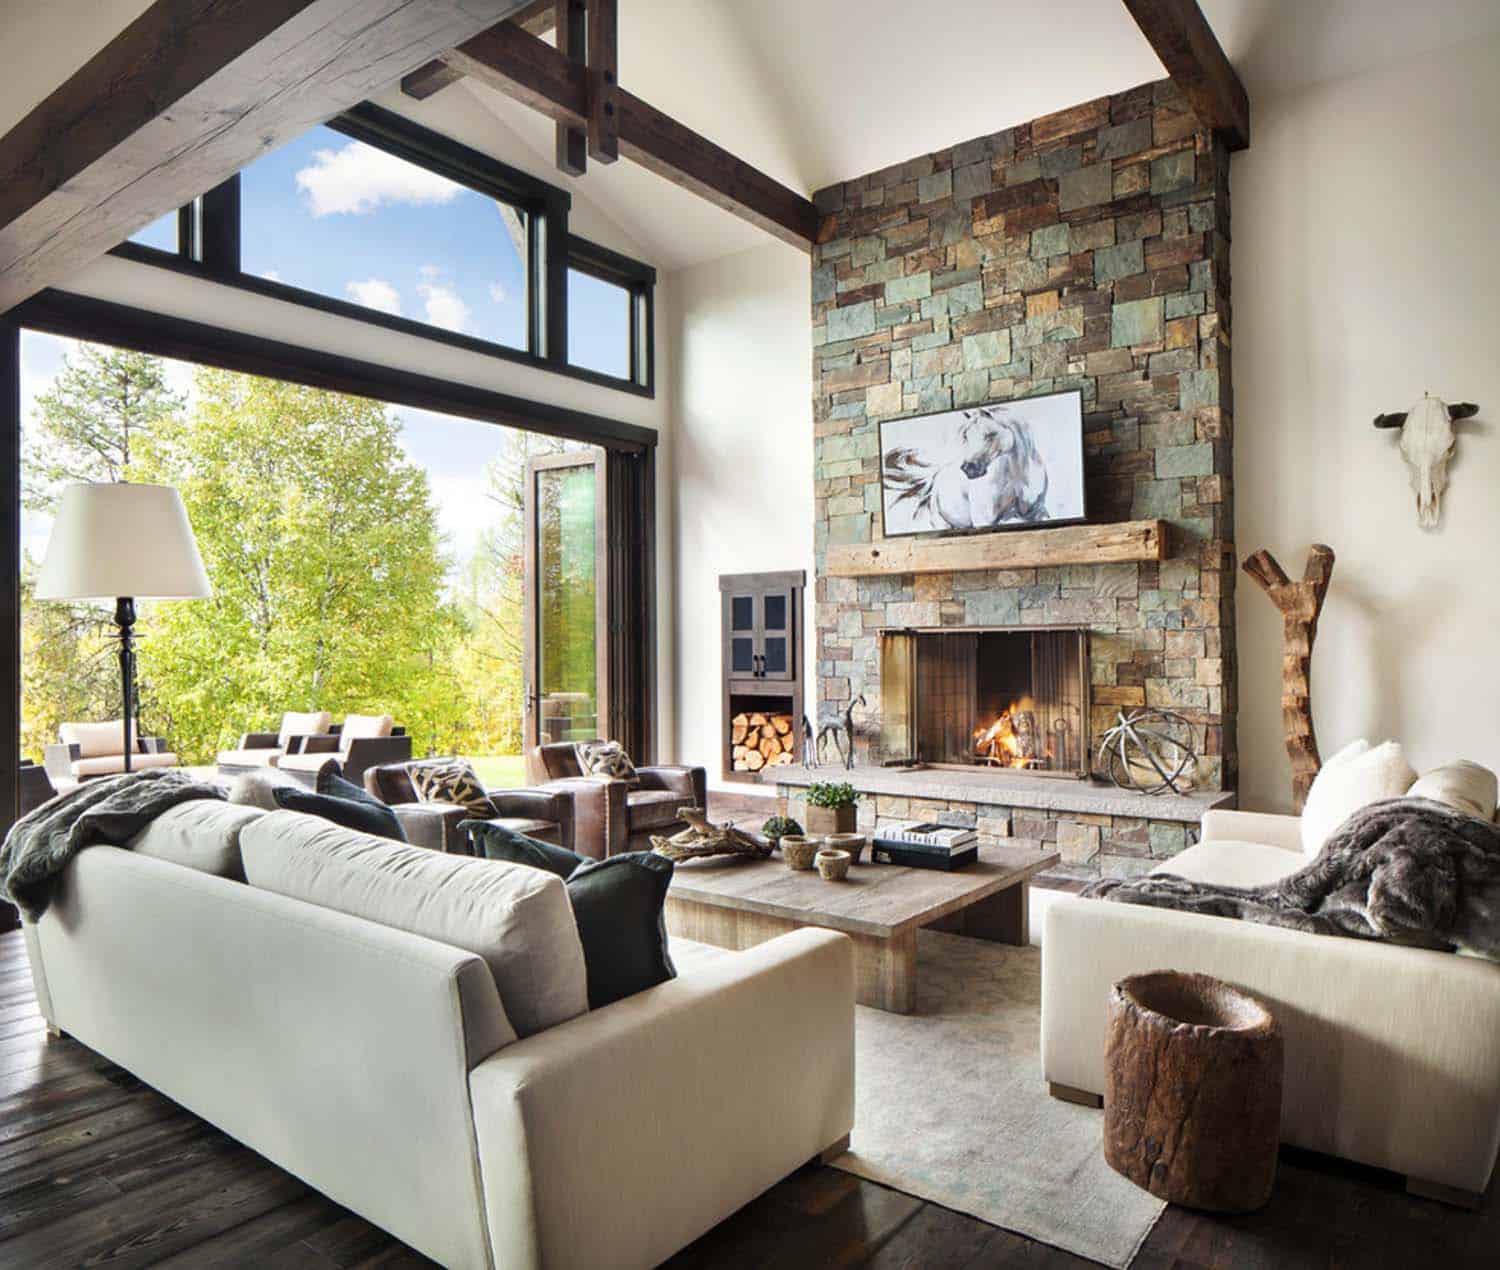 Rusticmodern dwelling nestled in the northern Rocky Mountains